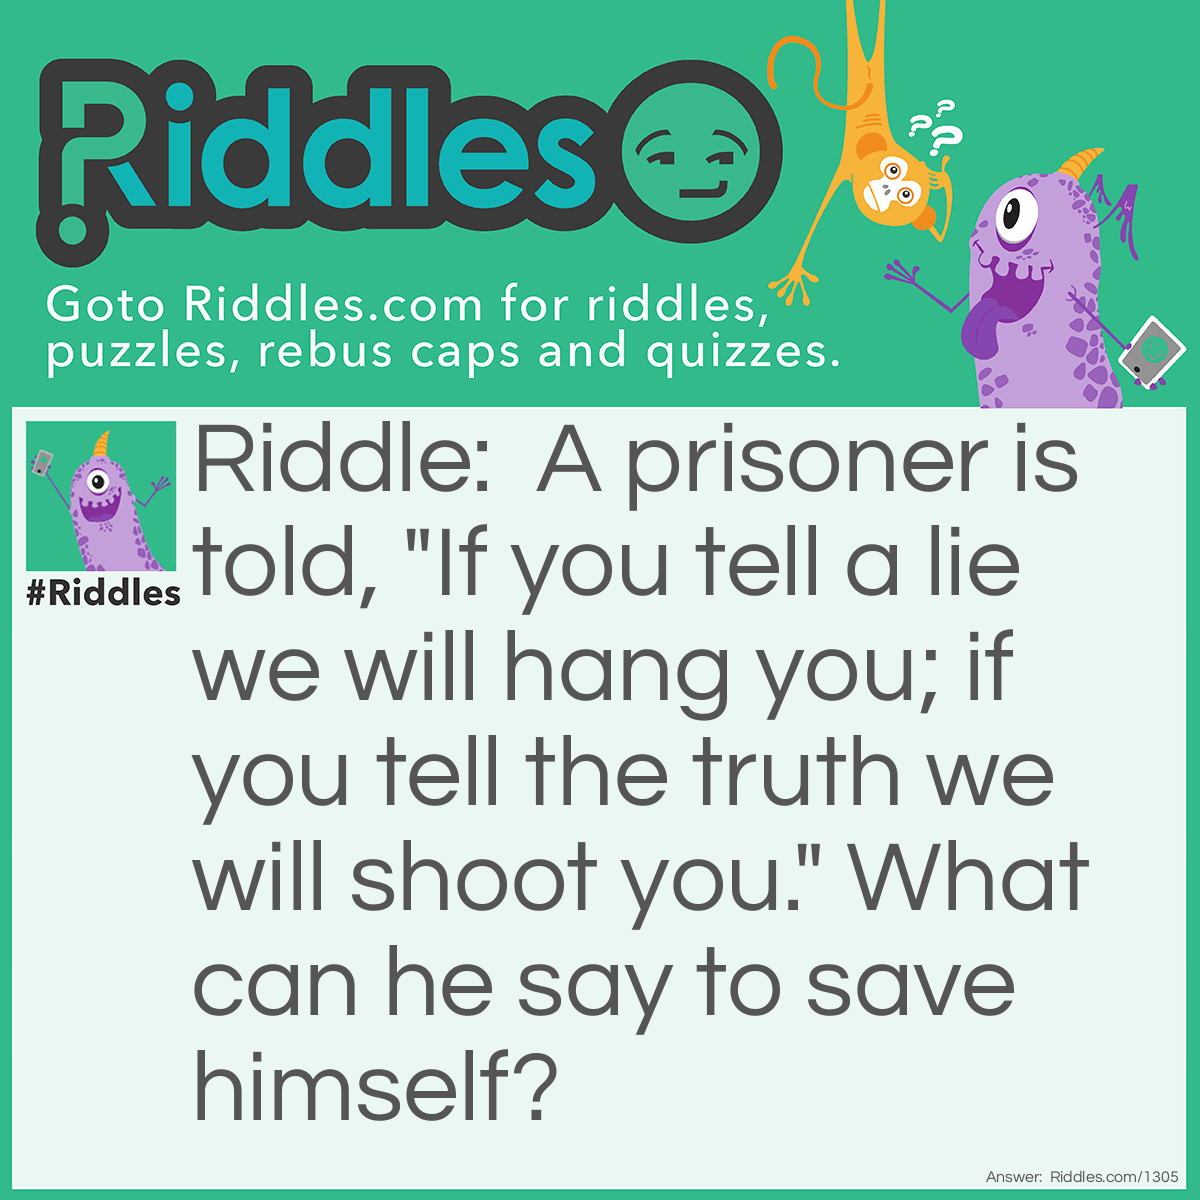 Riddle: A prisoner is told, "If you tell a lie we will hang you; if you tell the truth we will shoot you." What can he say to save himself? Answer: You will hang me.